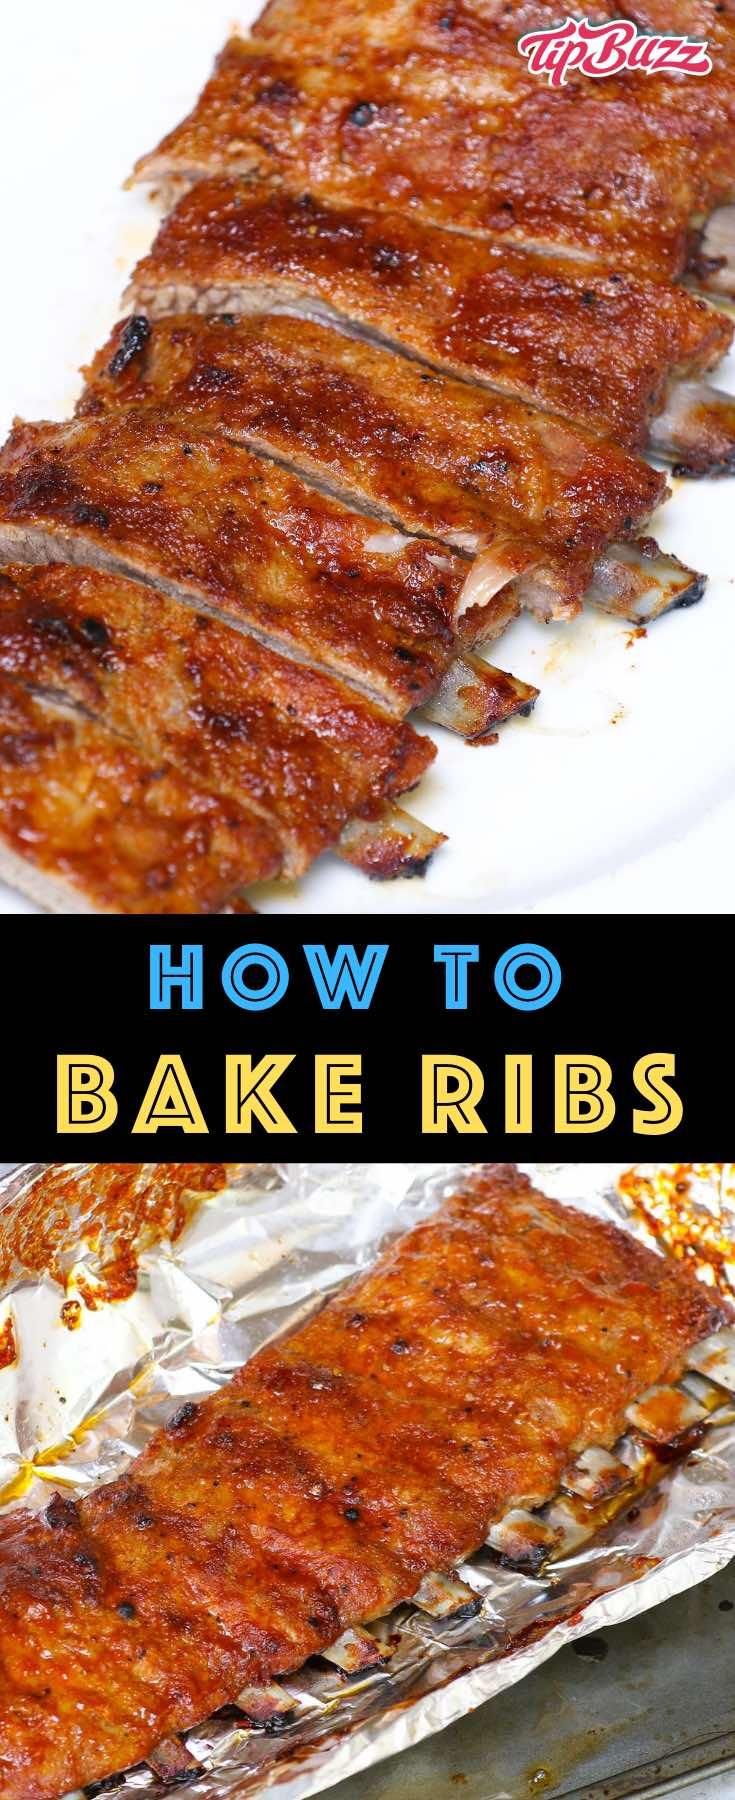 Learn how to bake pork ribs to perfection in the oven at any temperature and for any type of ribs! So delicious and easy to make